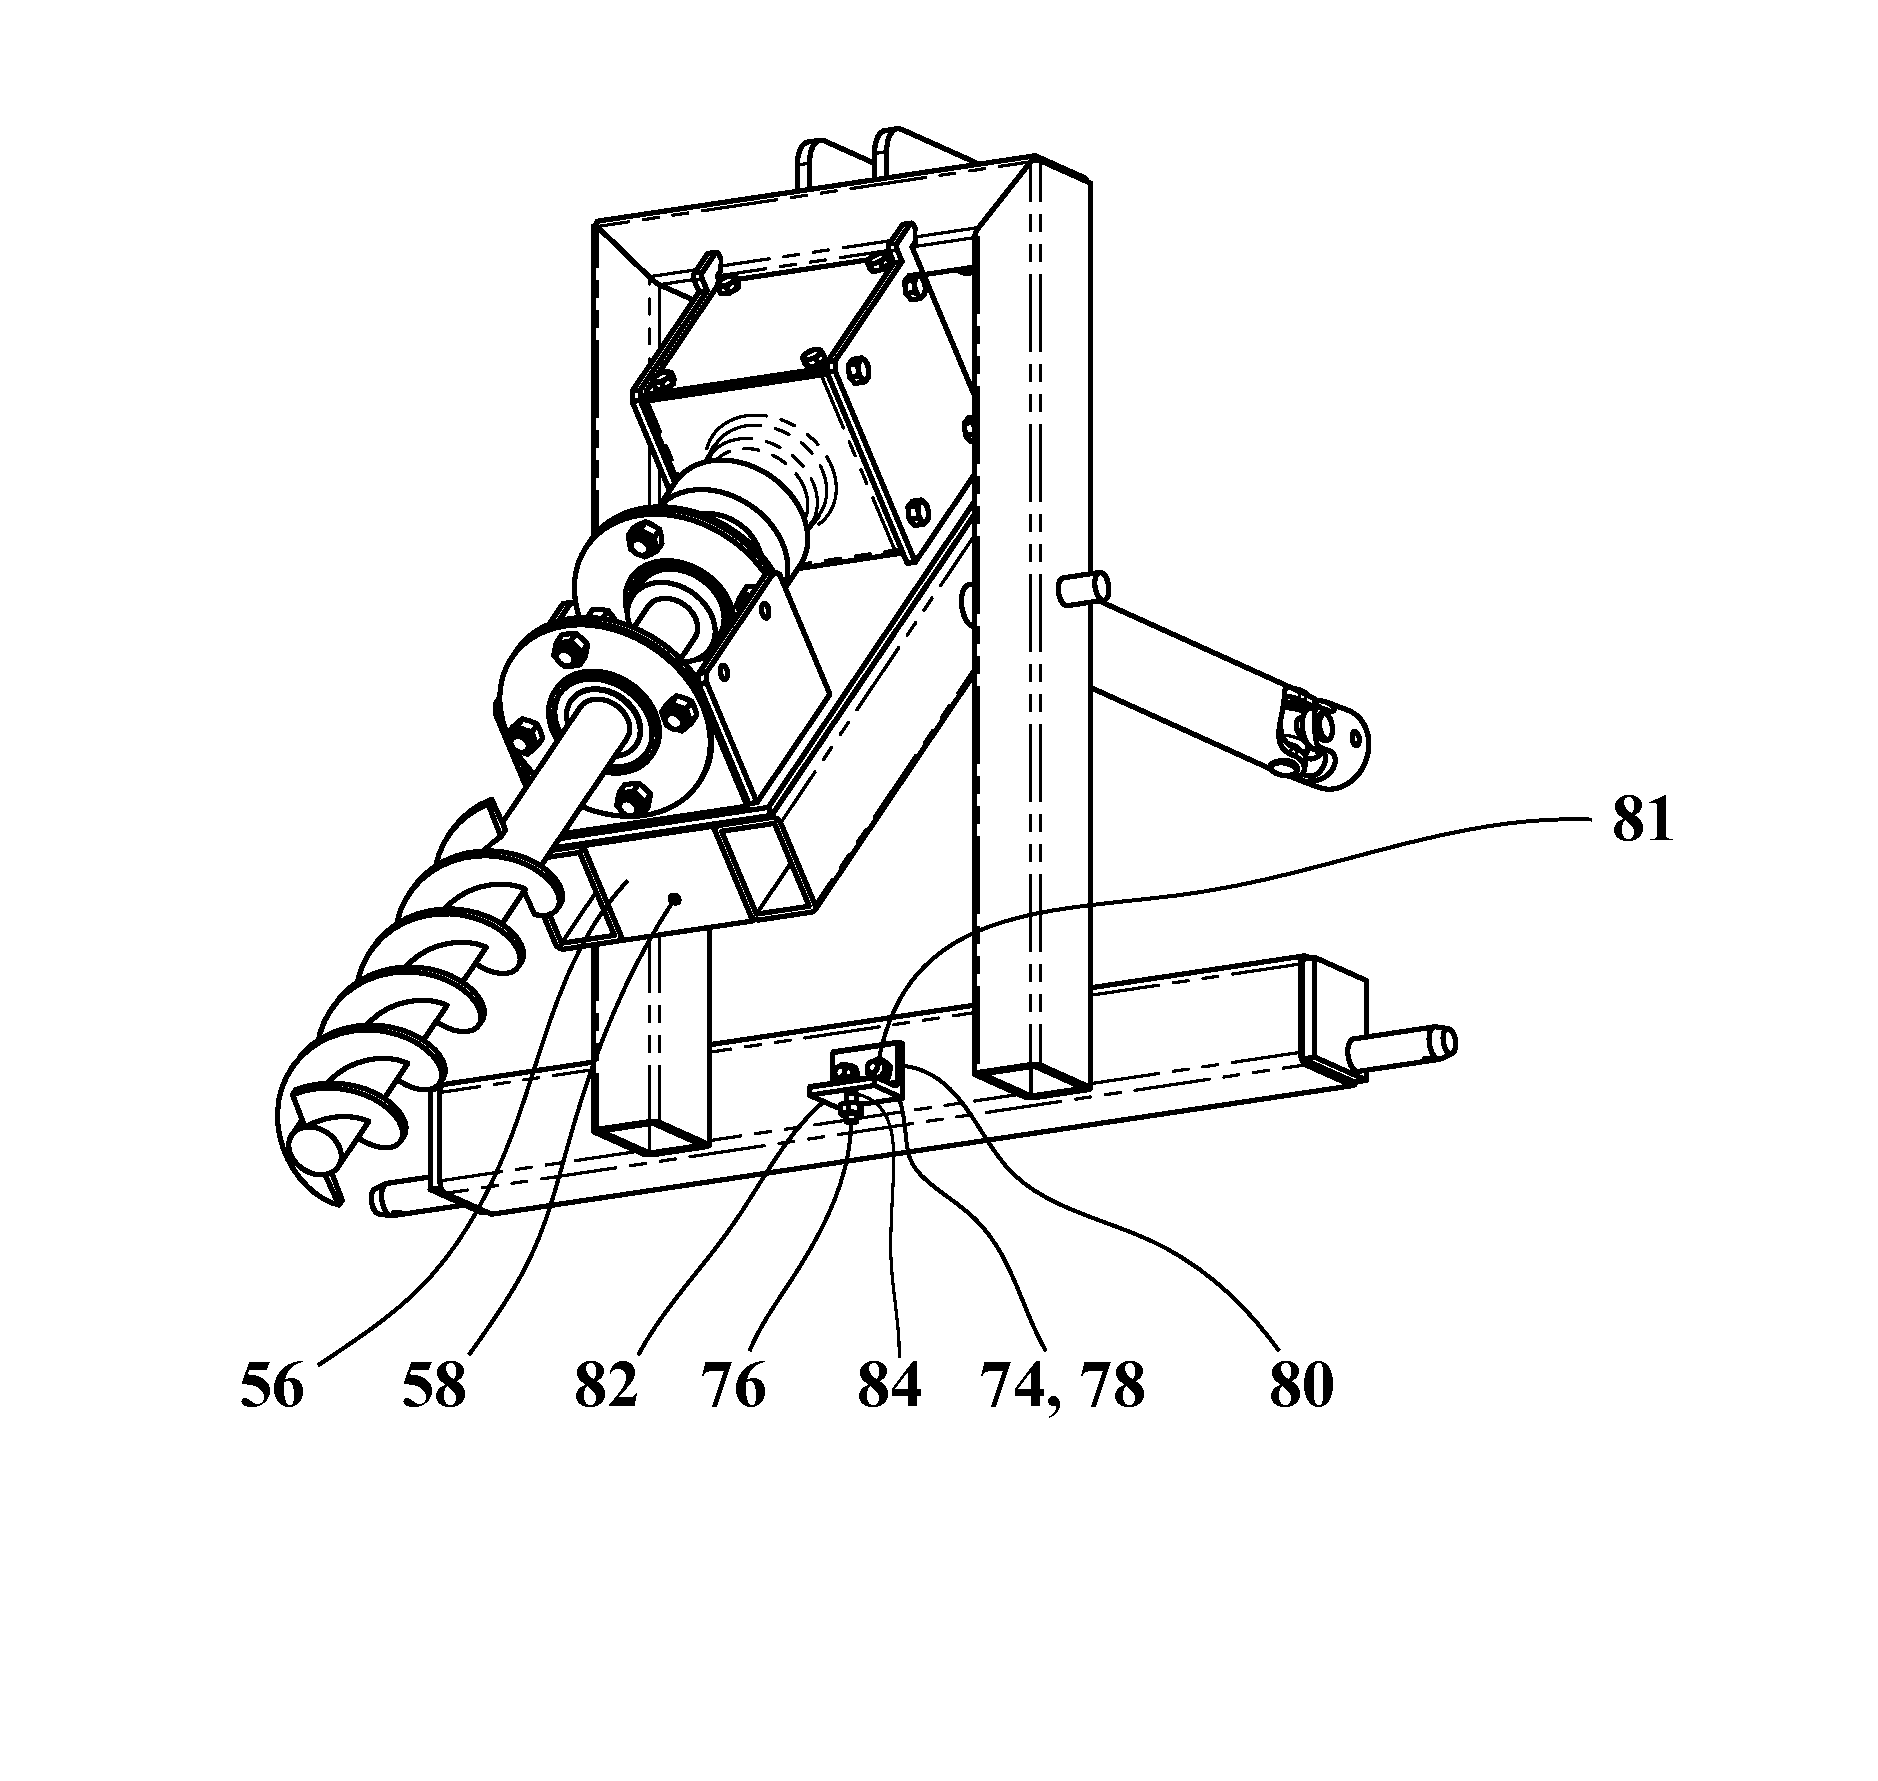 Horizontal auger garden tilling apparatus and method of use